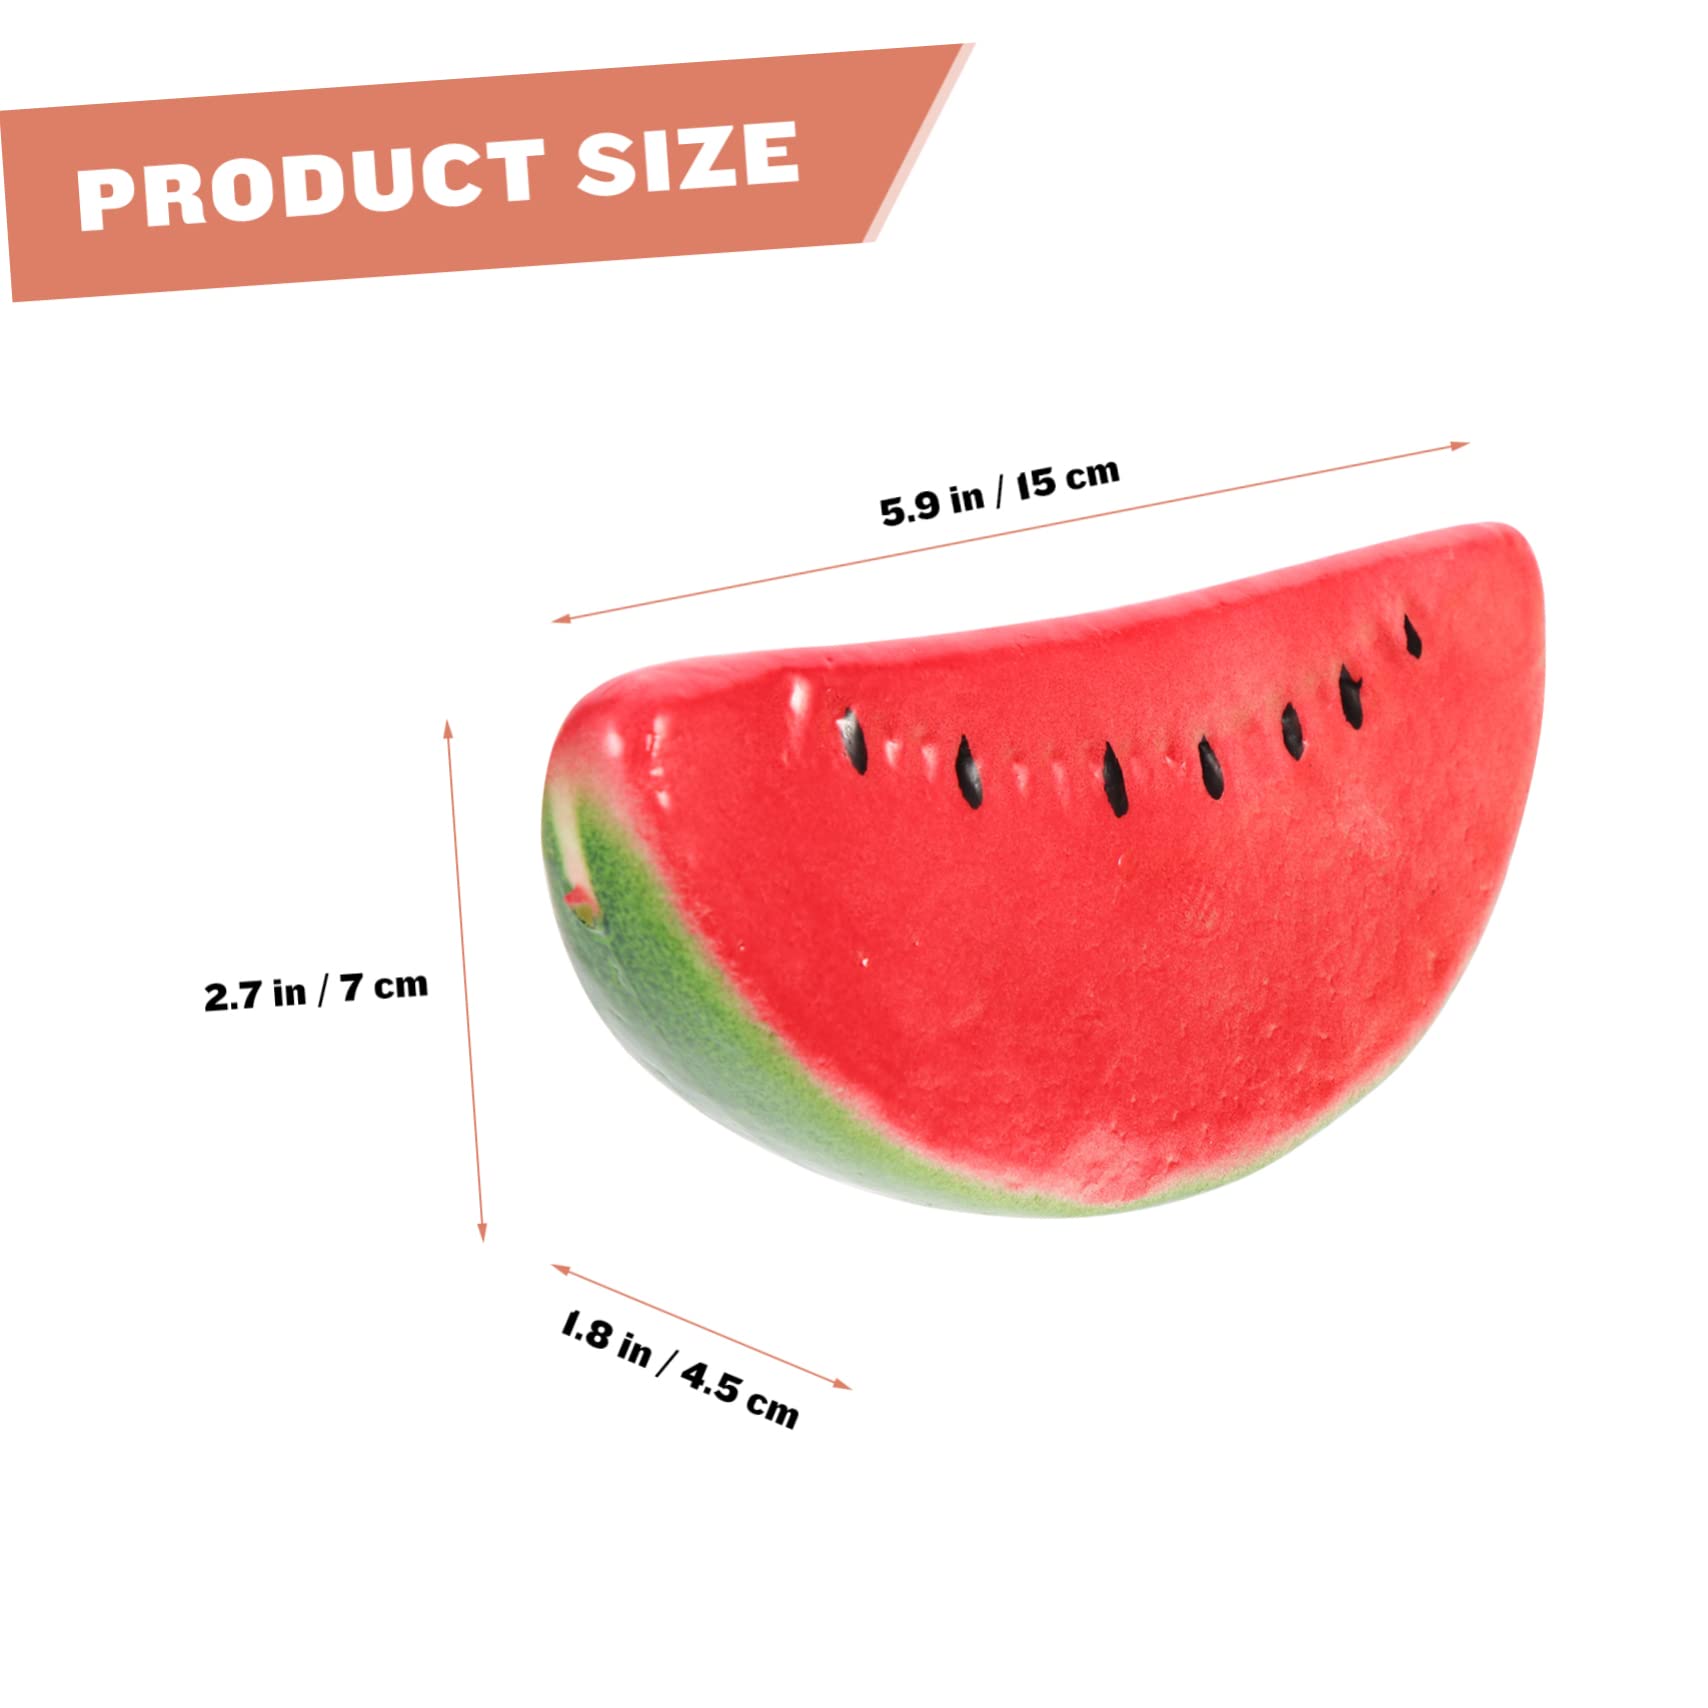 ORFOFE 24 Pcs Simulated Watermelon Photo Prop Fake Watermelon Slices Watermelon Toy Fake Watermelon Prop Faux Vegetables Children Toys Artificial Food Foam Red Fruit Slices